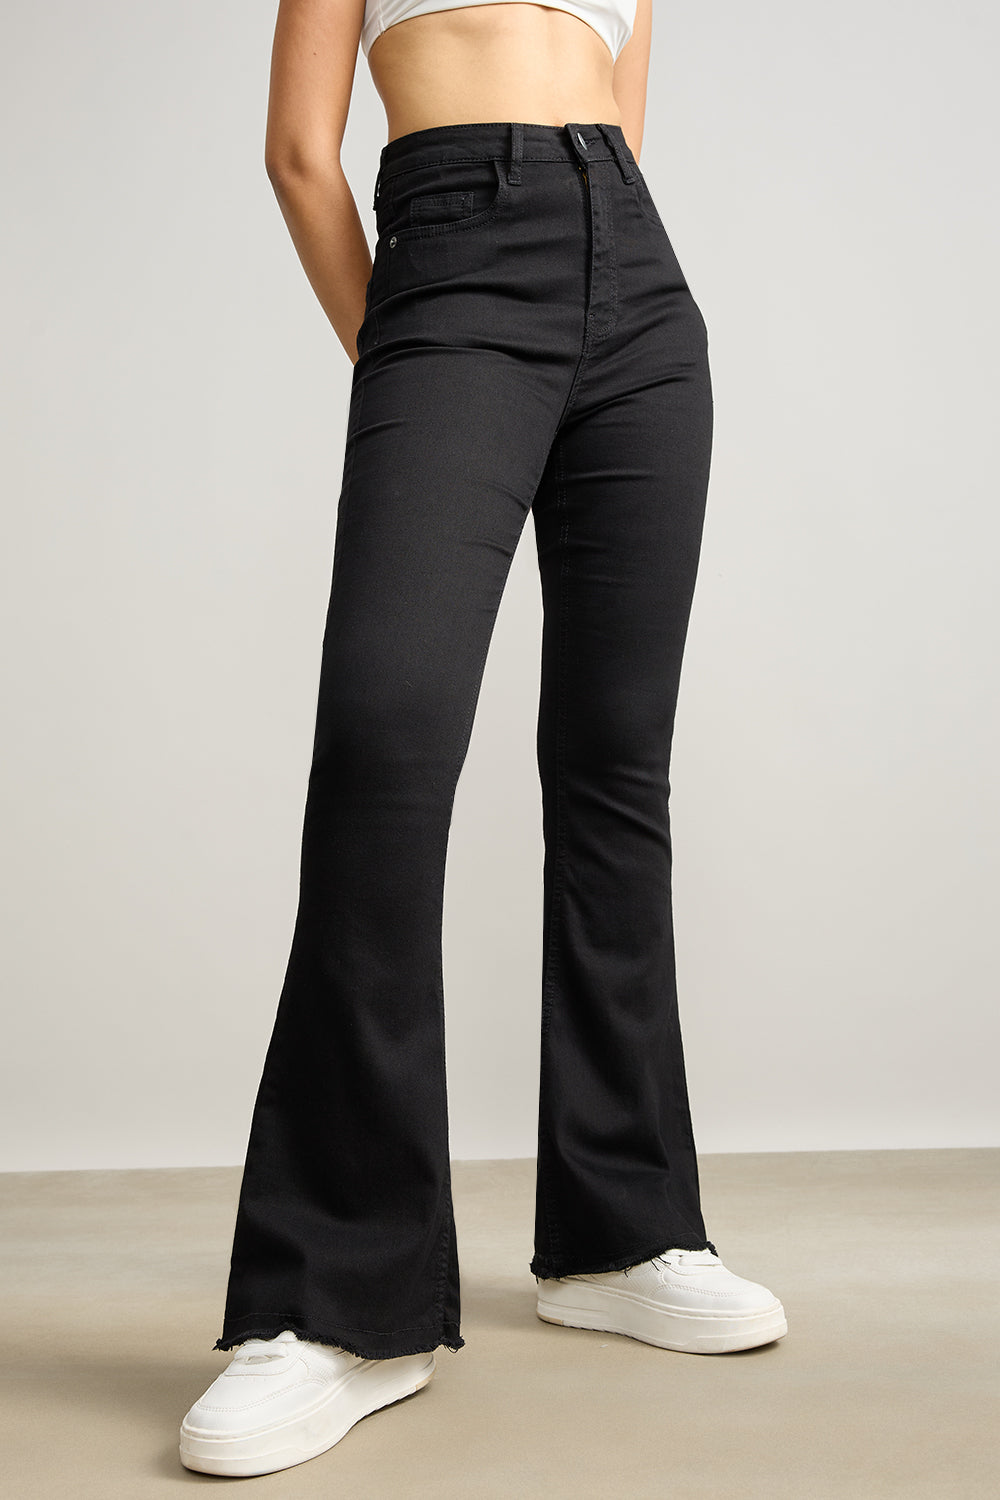 HIGH WAISTED SLIM BLACK BOOTCUT JEANS